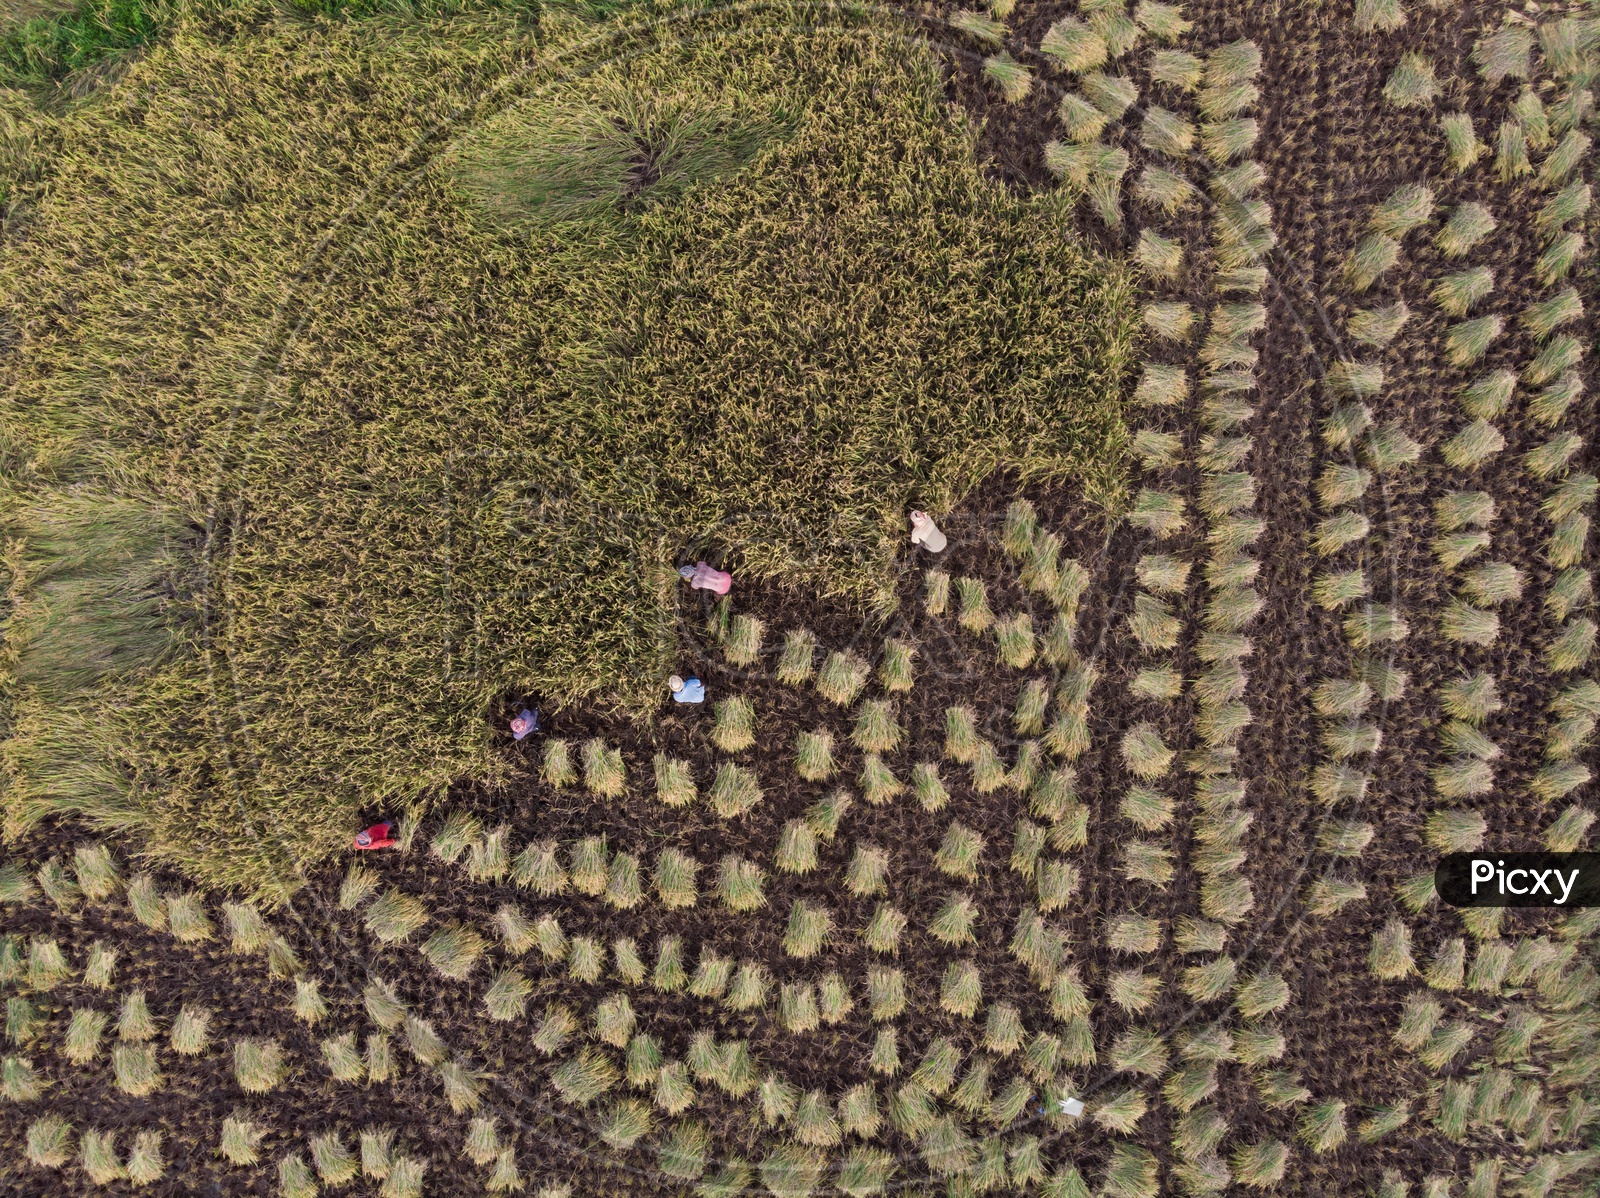 Aerial view of paddy harvesting